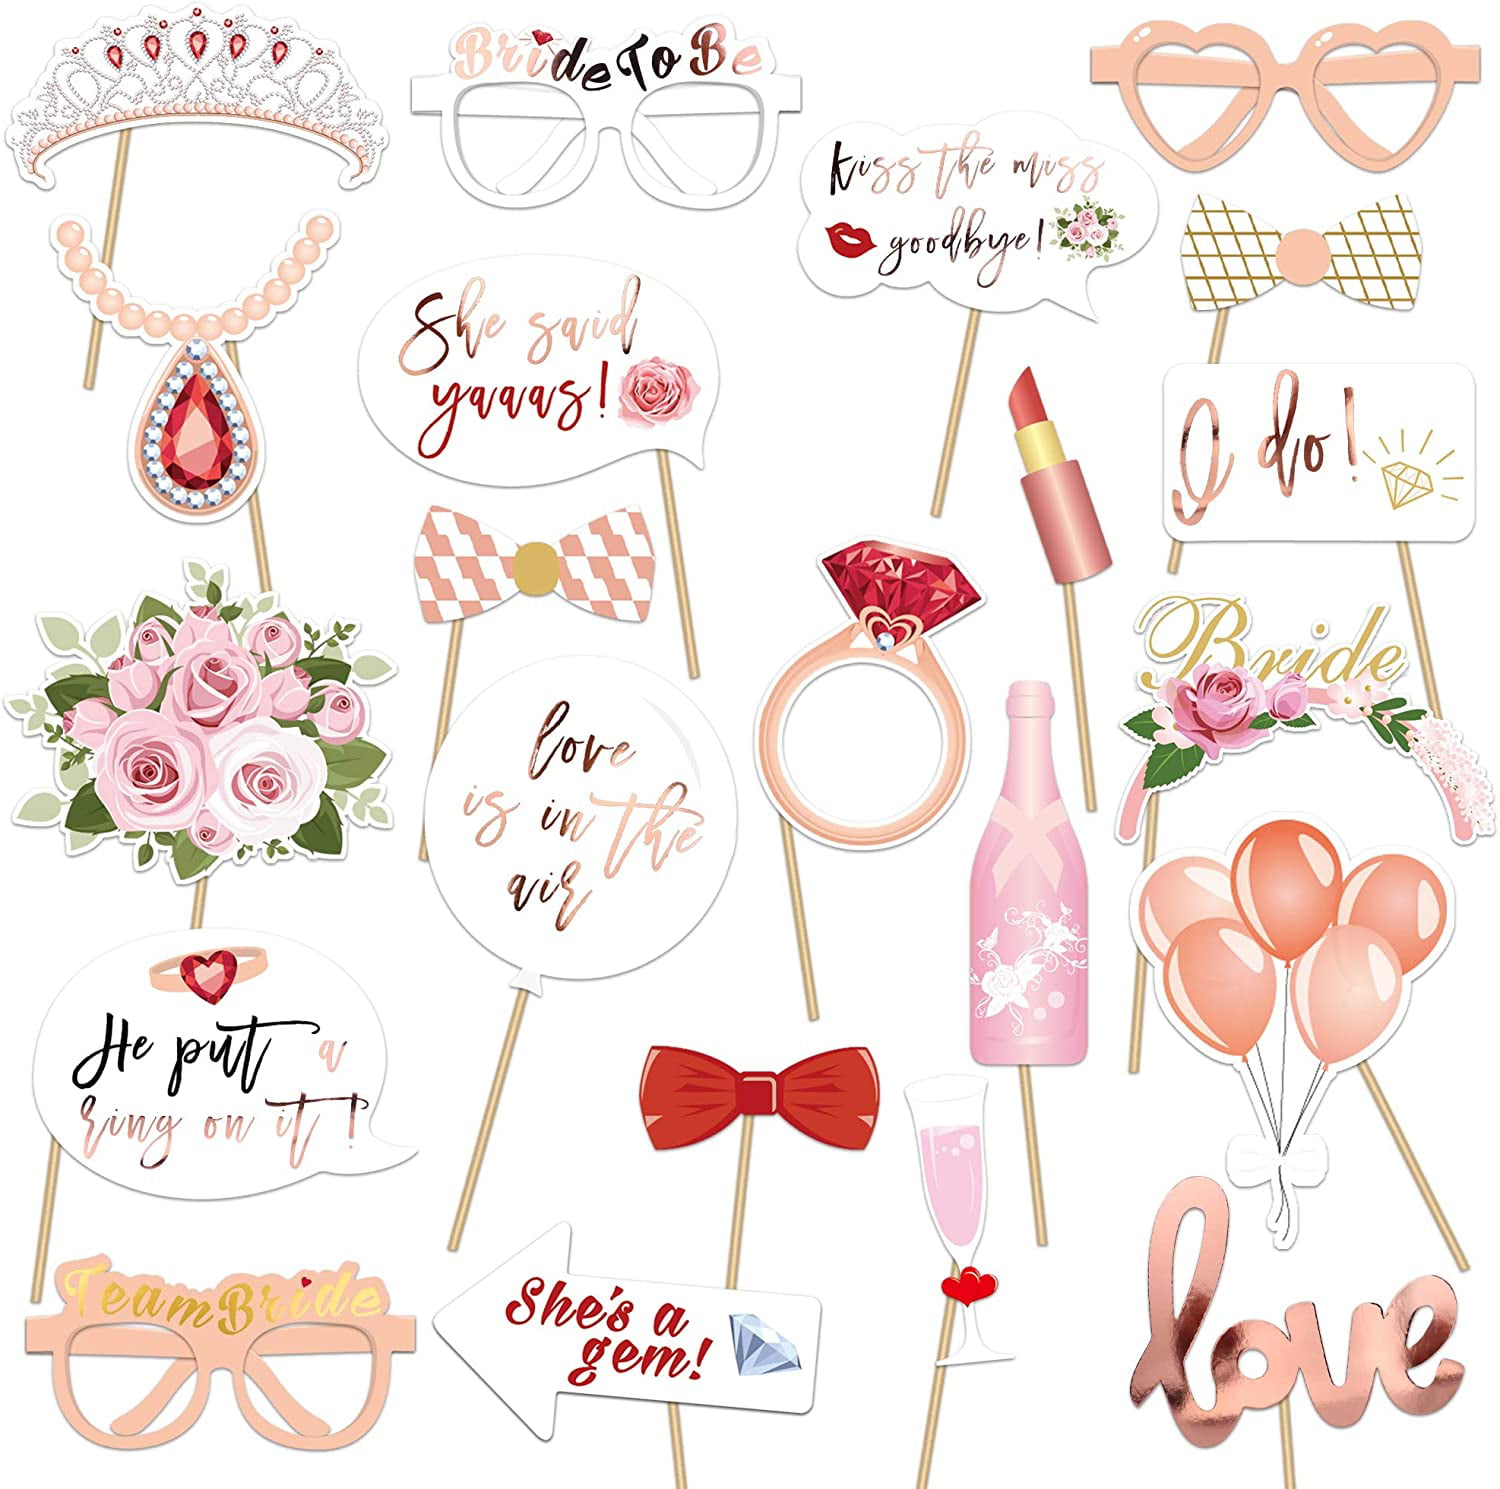 Rose Gold Hen Night Do Party Games Accessories Team Bride Selfie Props Wedding Photo Props for Wedding Bridal Shower Bachelorette Party 46PCS Hen Party Photo Booth Props 